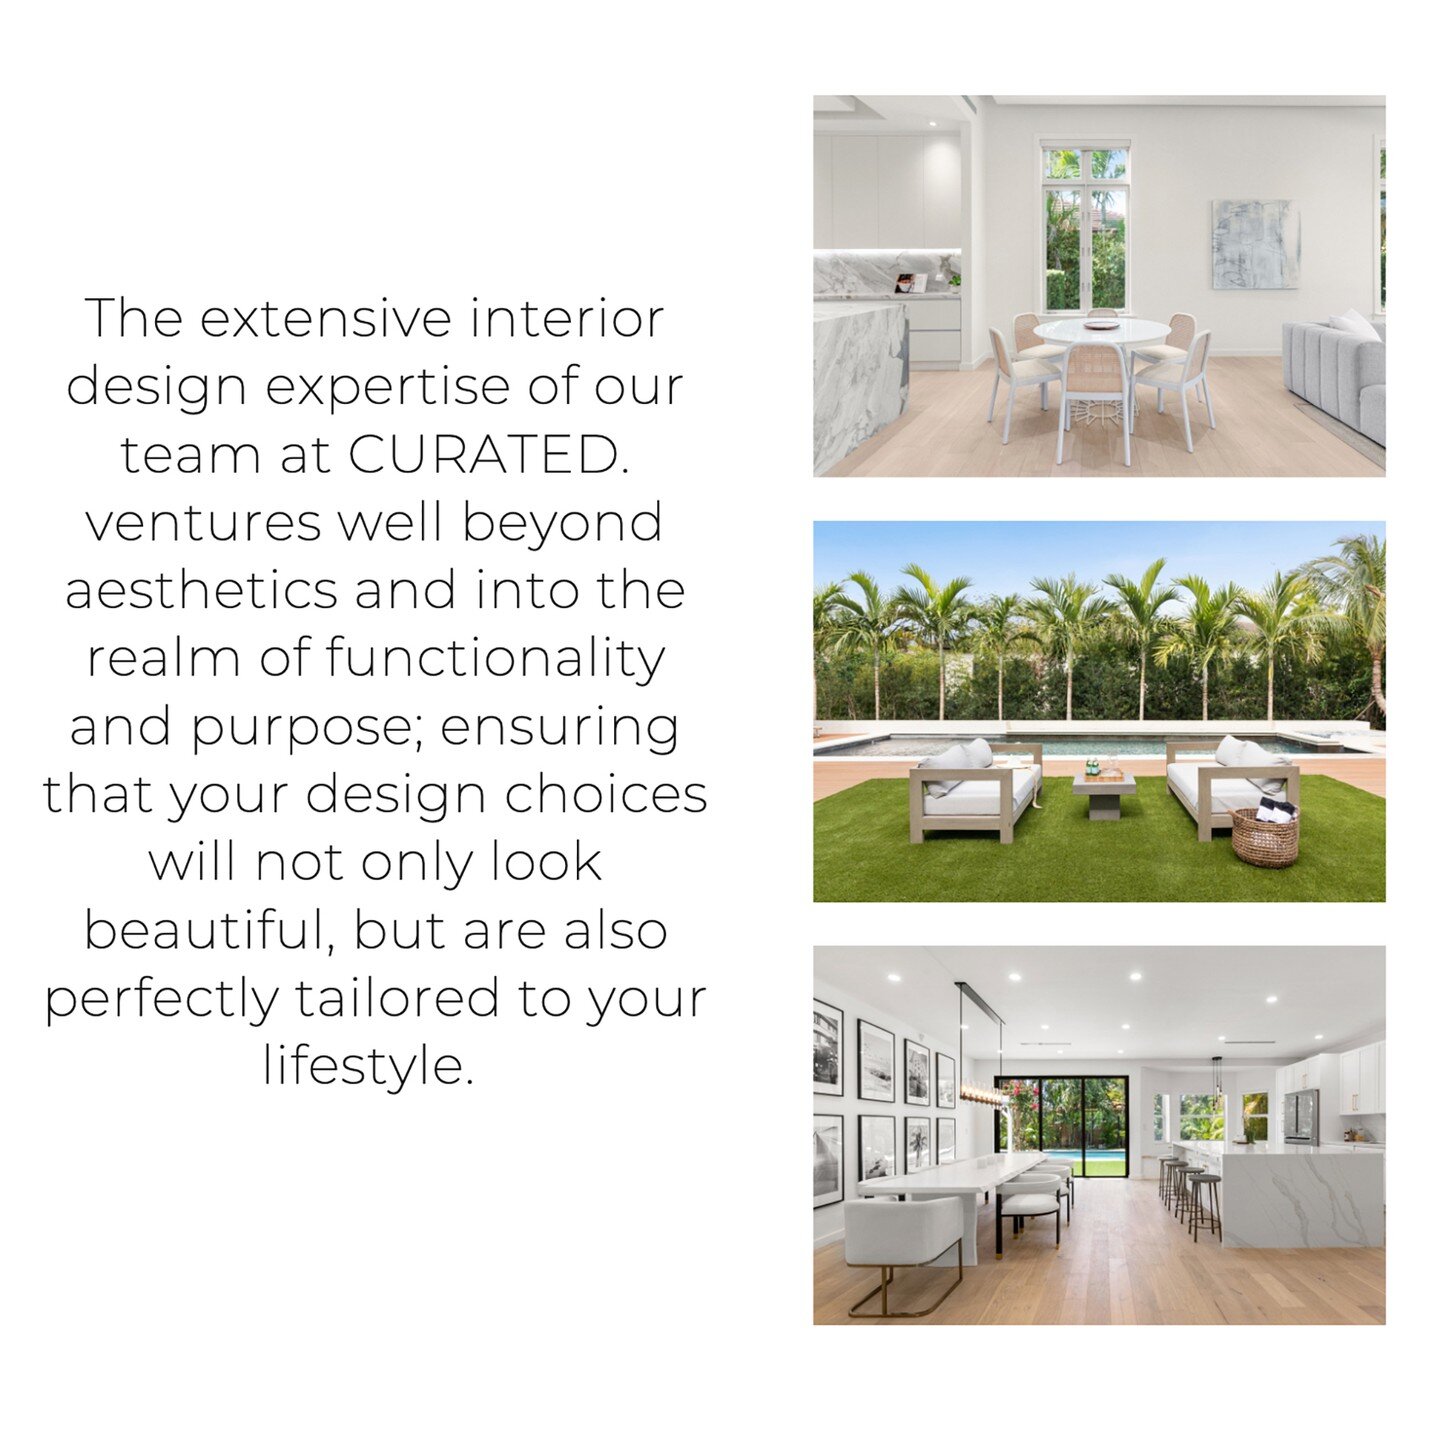 A Touch of European Allure: CURATED. is an Austrian-led luxury interior design firm (headquartered in Miami Beach) with a process-driven international team that's renowned for meticulous attention to detail. 

LEARN MORE: https://thecurated.group/ (l